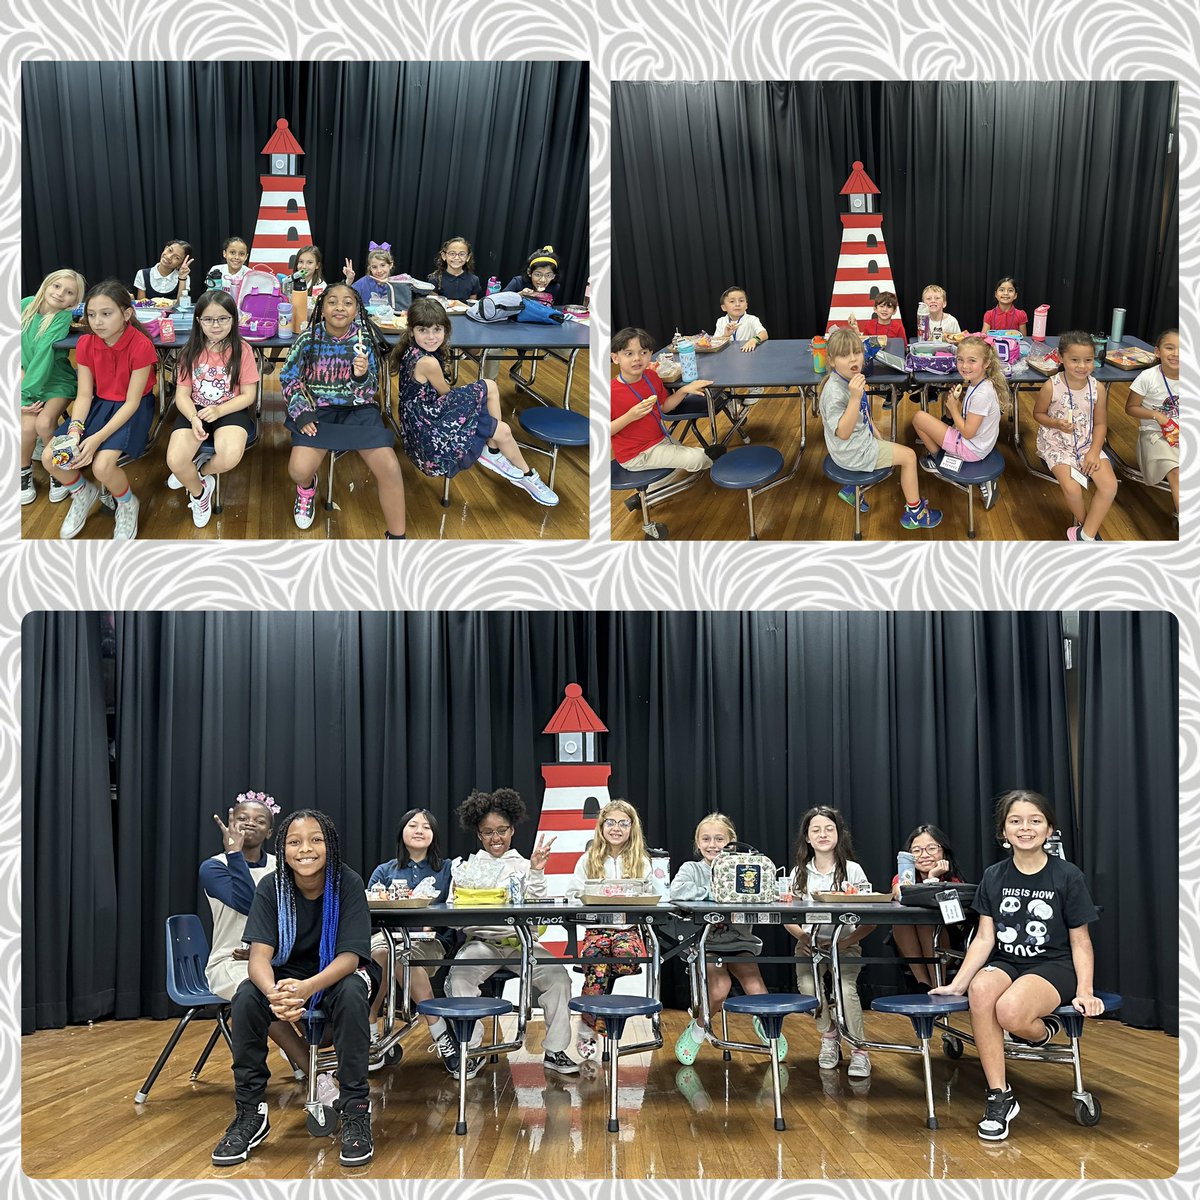 Today we kicked off our lunch incentive with these winners! Lunch on the stage! Keep up the great work! @HillsboroughSch #Riseupregion2 @HCPSElemRegion2